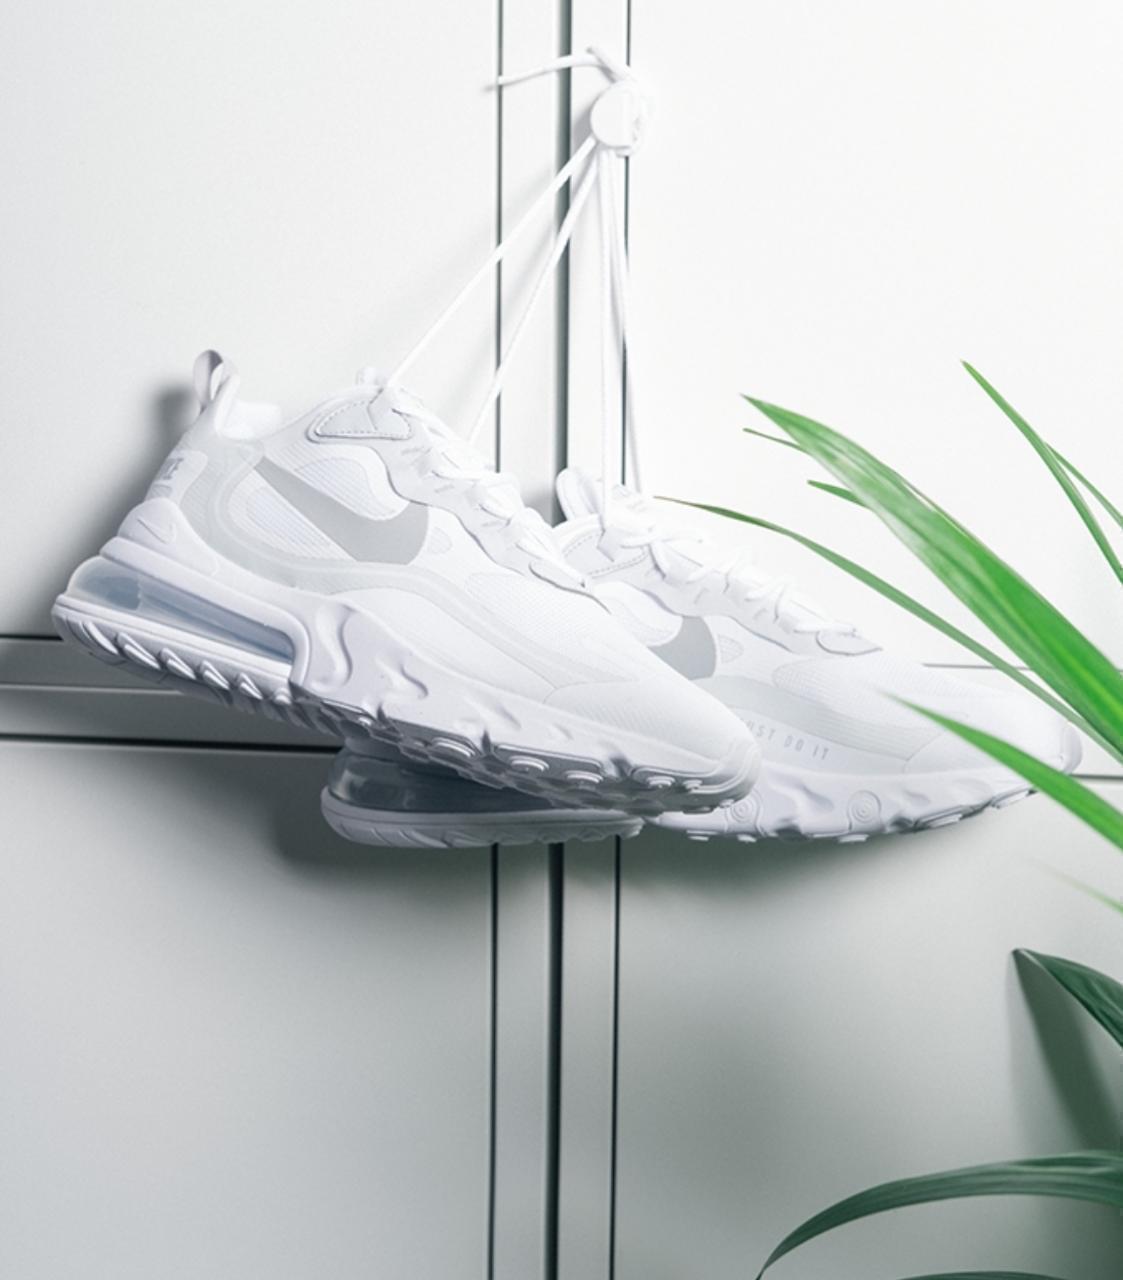 Branded Triple White Sports Shoes